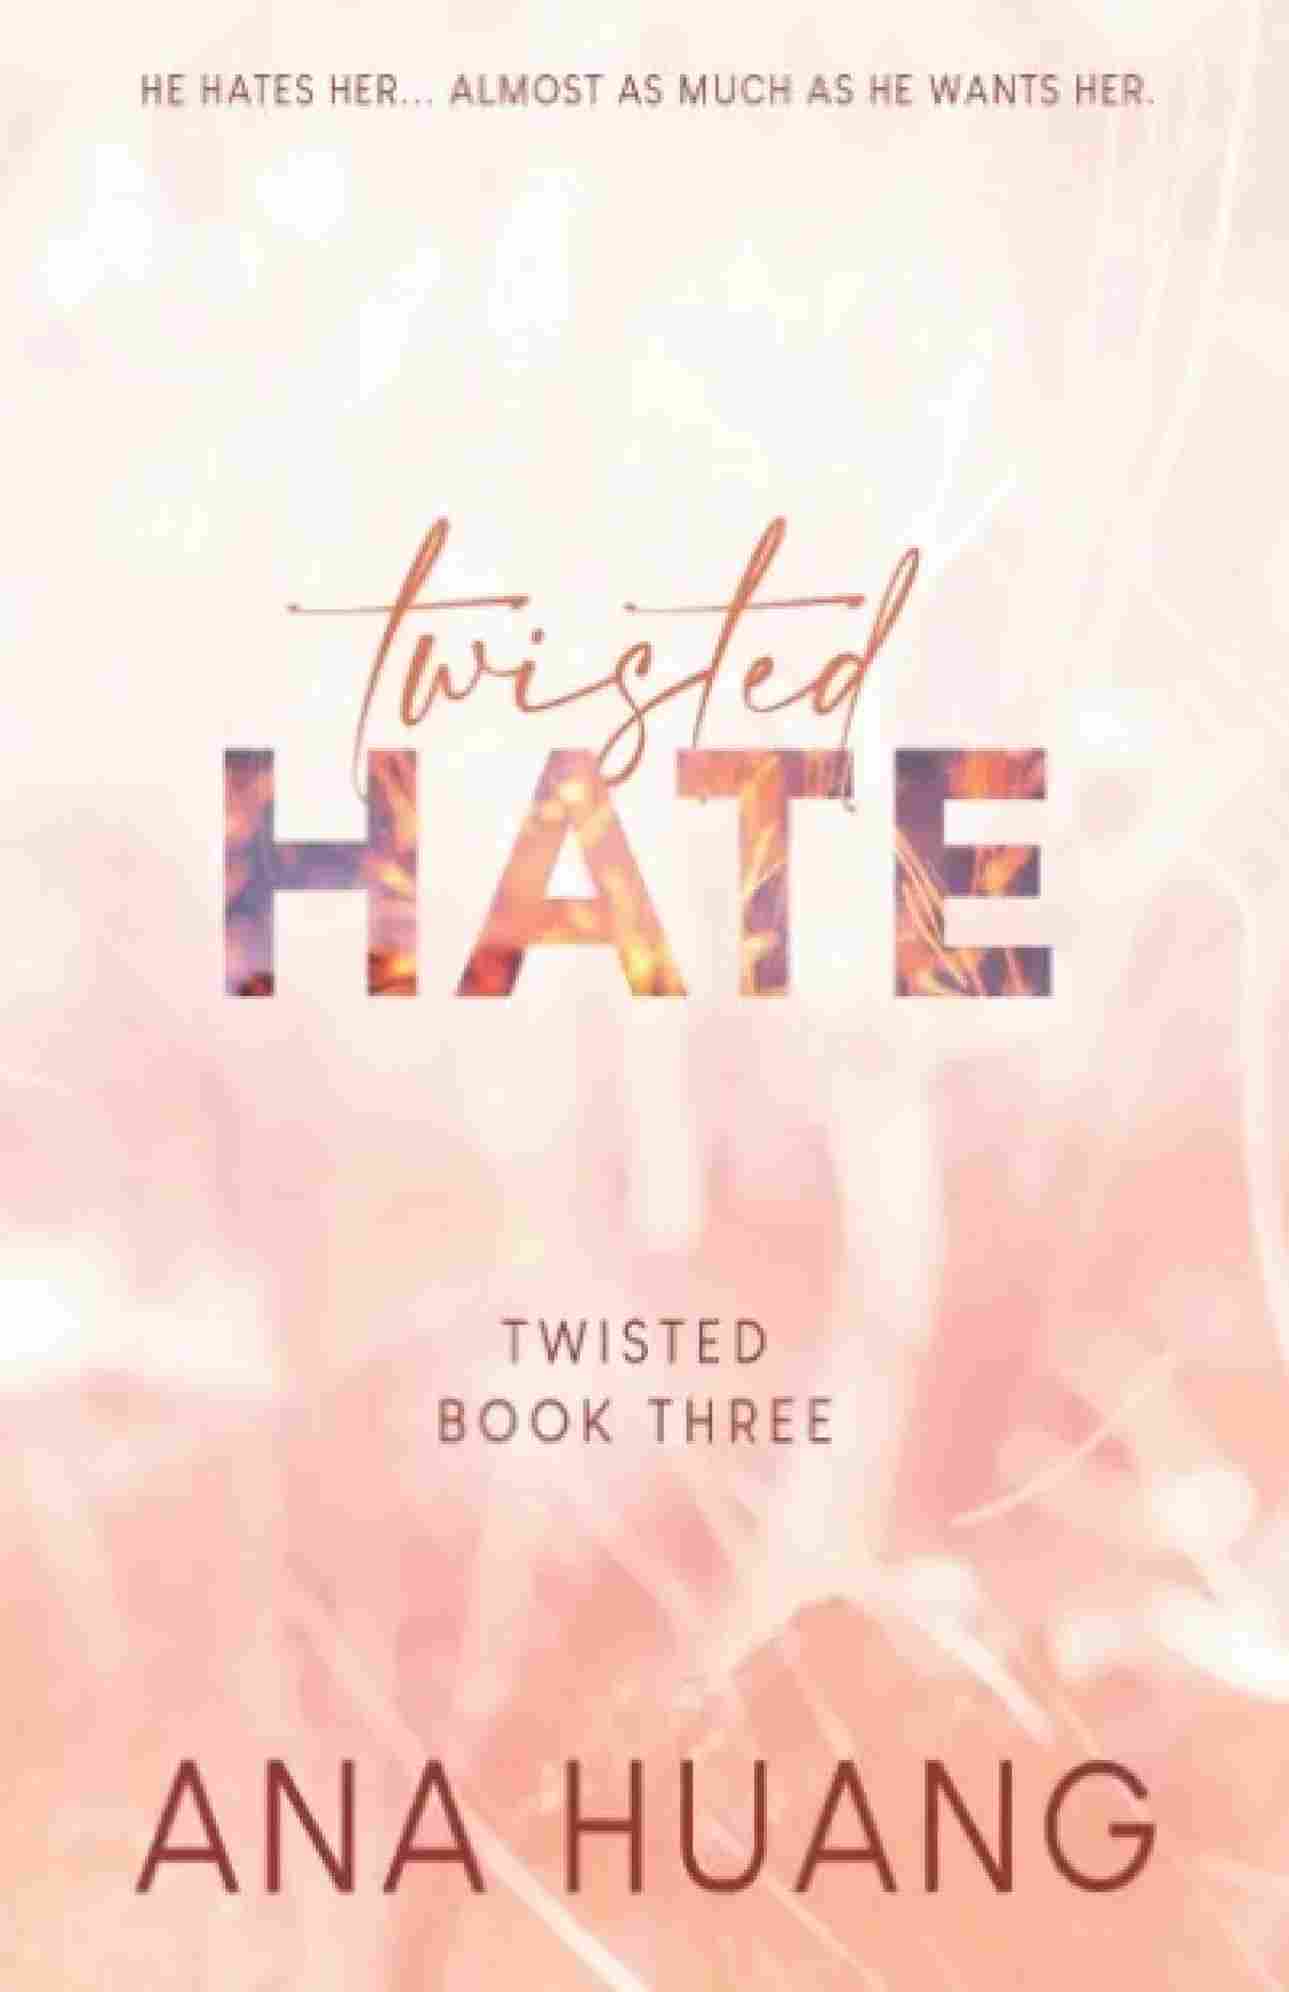 Twisted Hate (Paperback) - Ana Huang